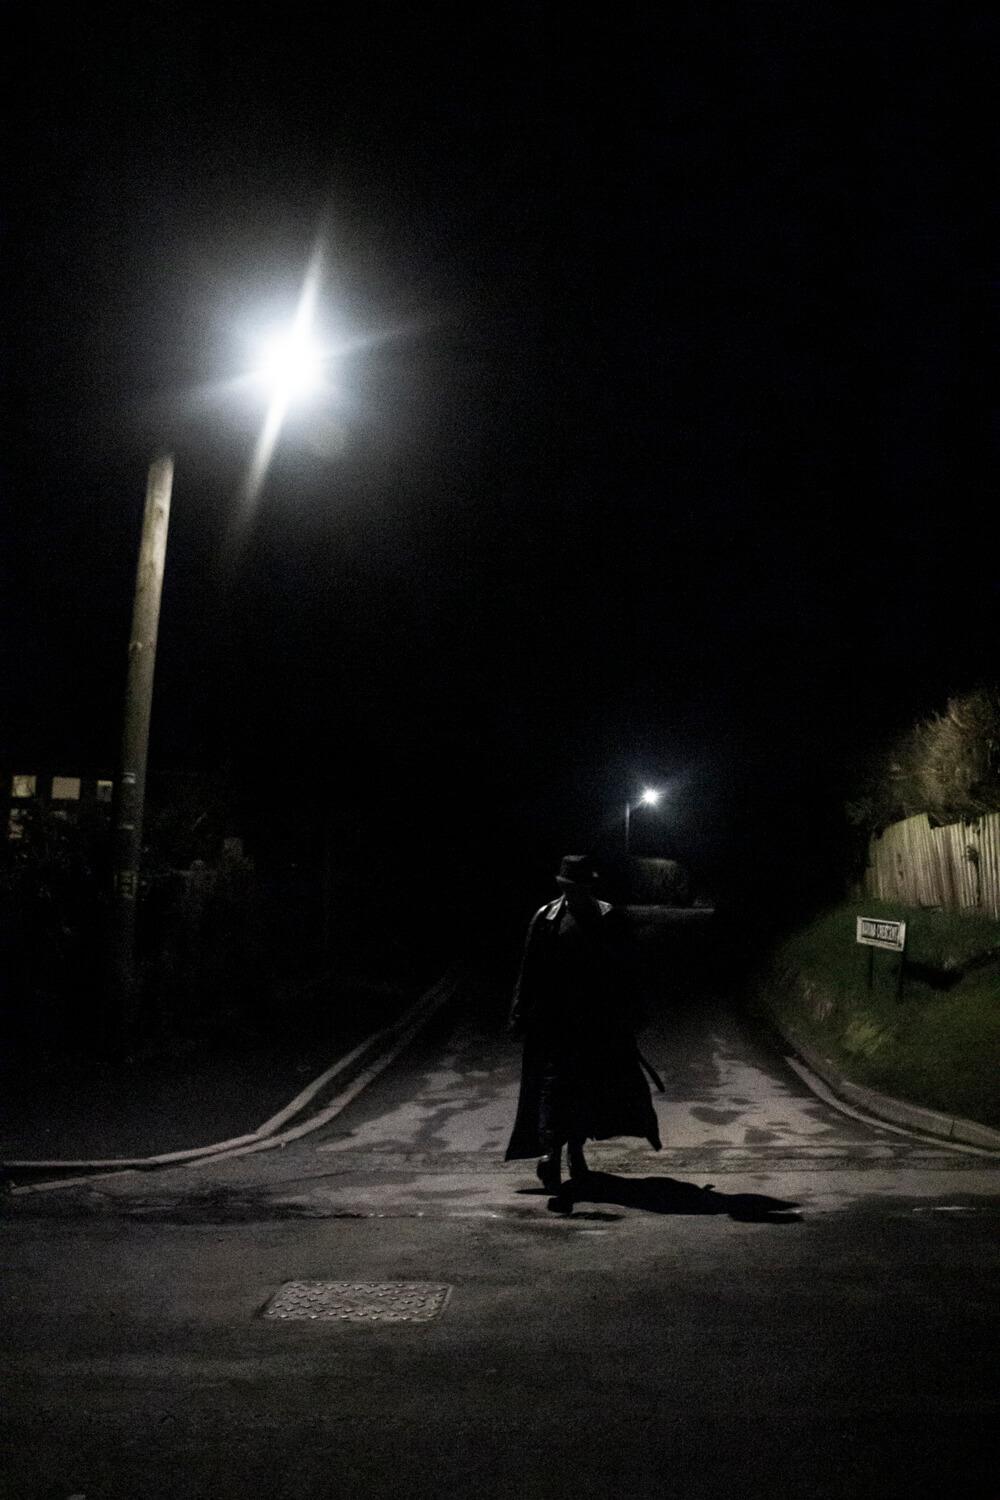 A shadowy figure walking toward the camera at night with a street light behind, casting harsh shadows